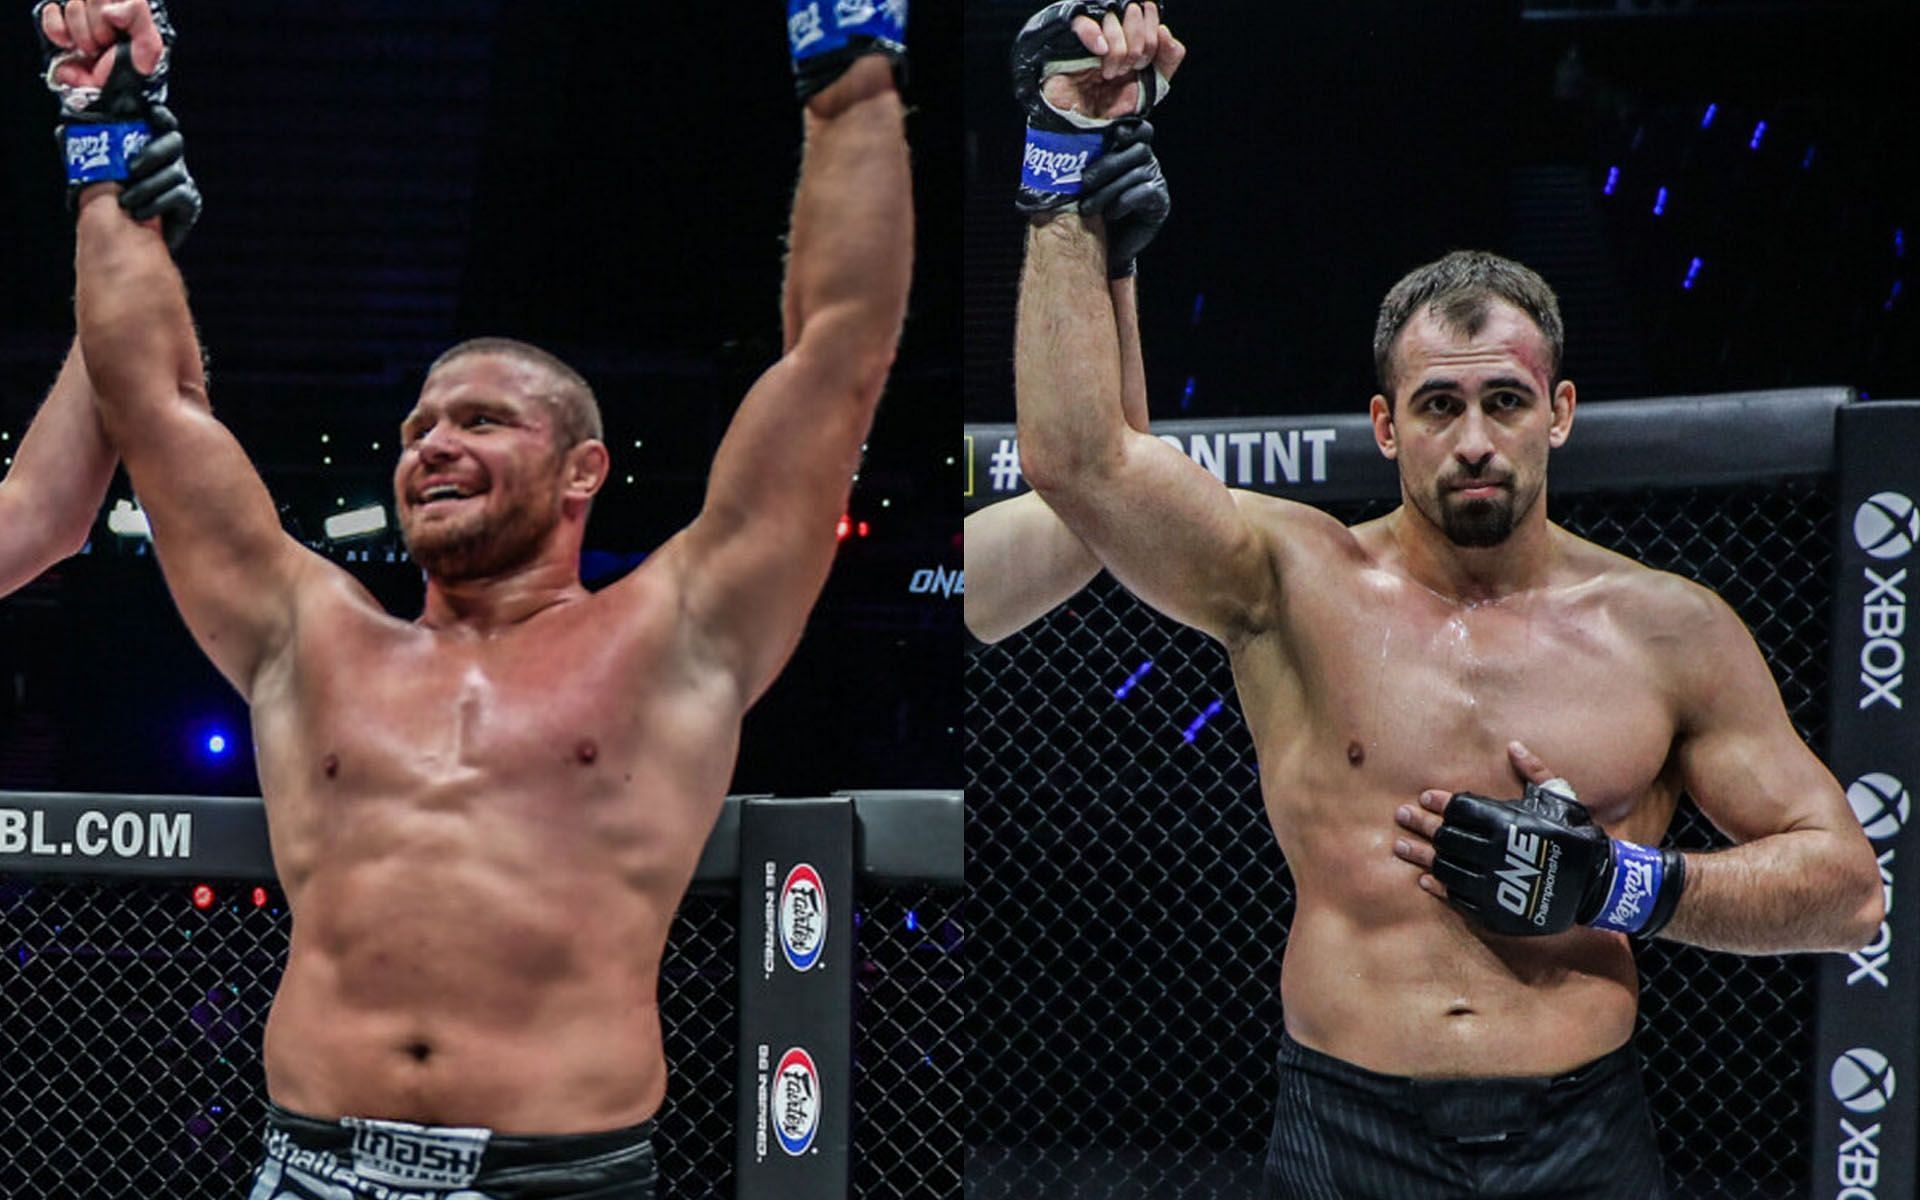 Will Anatoly Malykhin (Left) get his hand raised or will Kirill Grishenko (Right) find a way to stop his streak? | [Photos: ONE Championship]